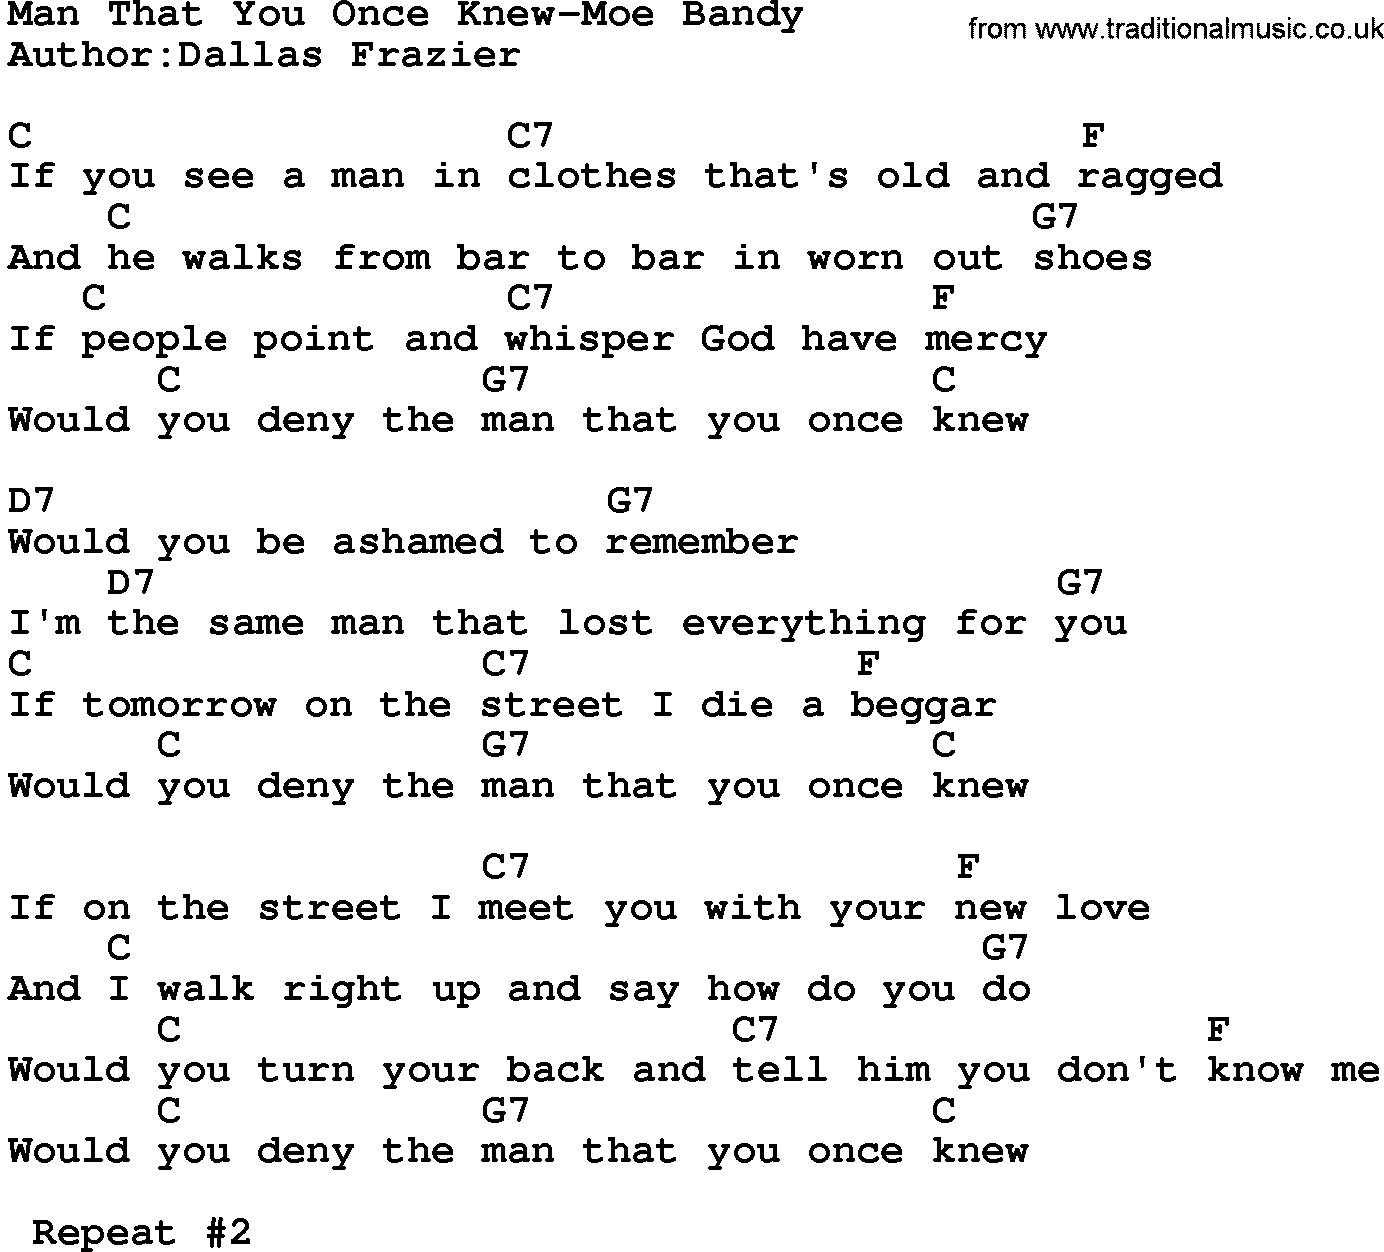 Country music song: Man That You Once Knew-Moe Bandy lyrics and chords